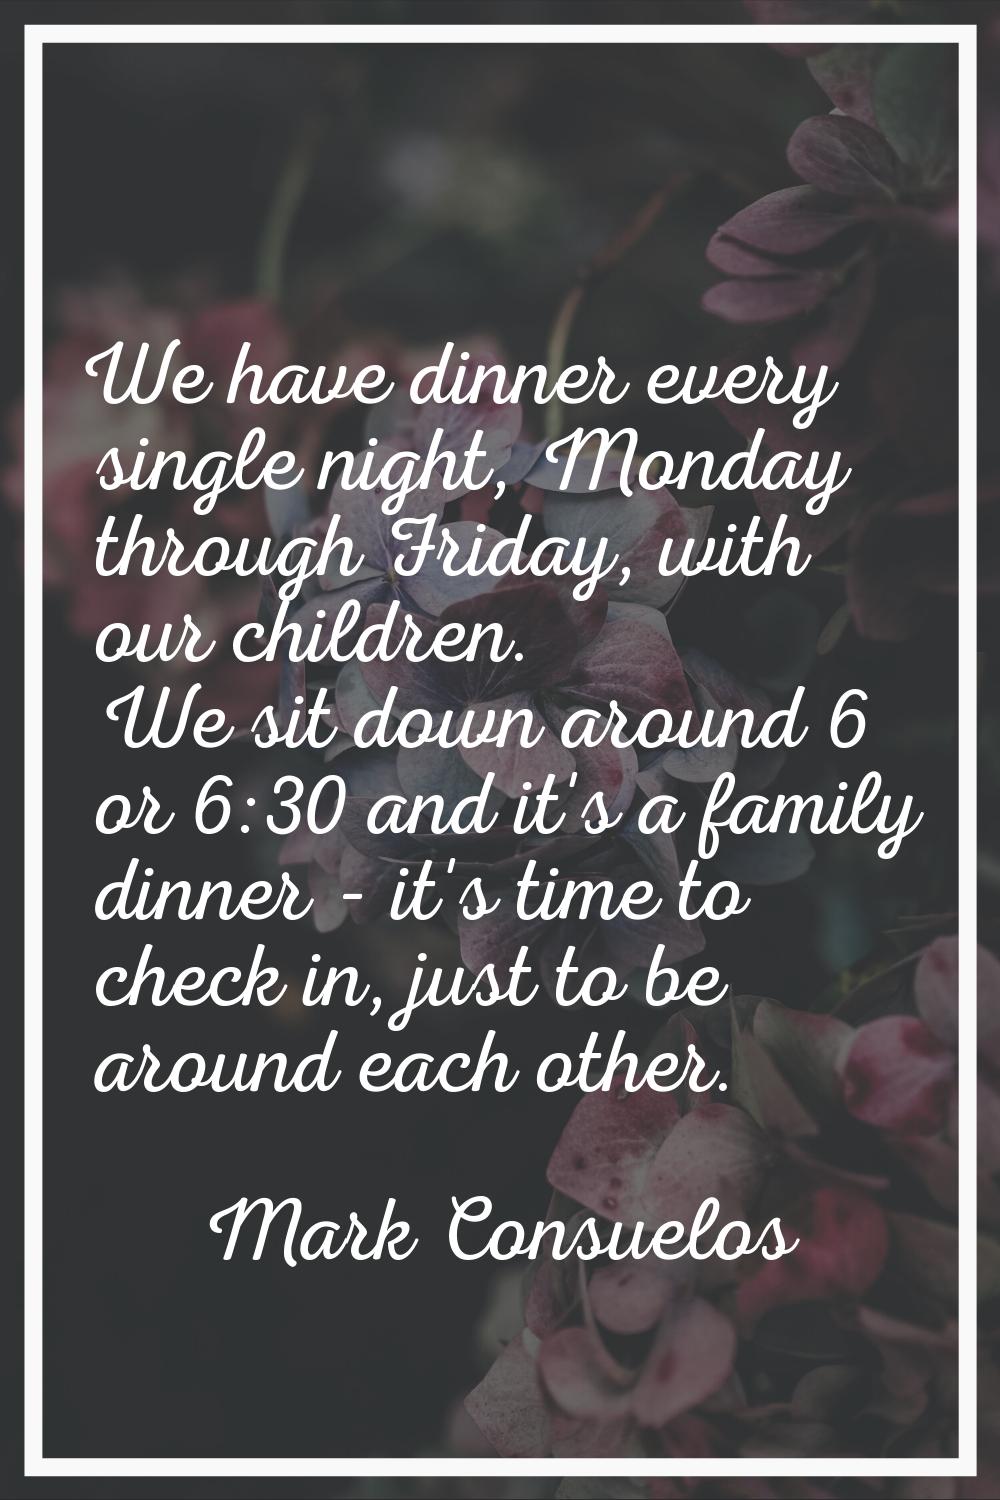 We have dinner every single night, Monday through Friday, with our children. We sit down around 6 o